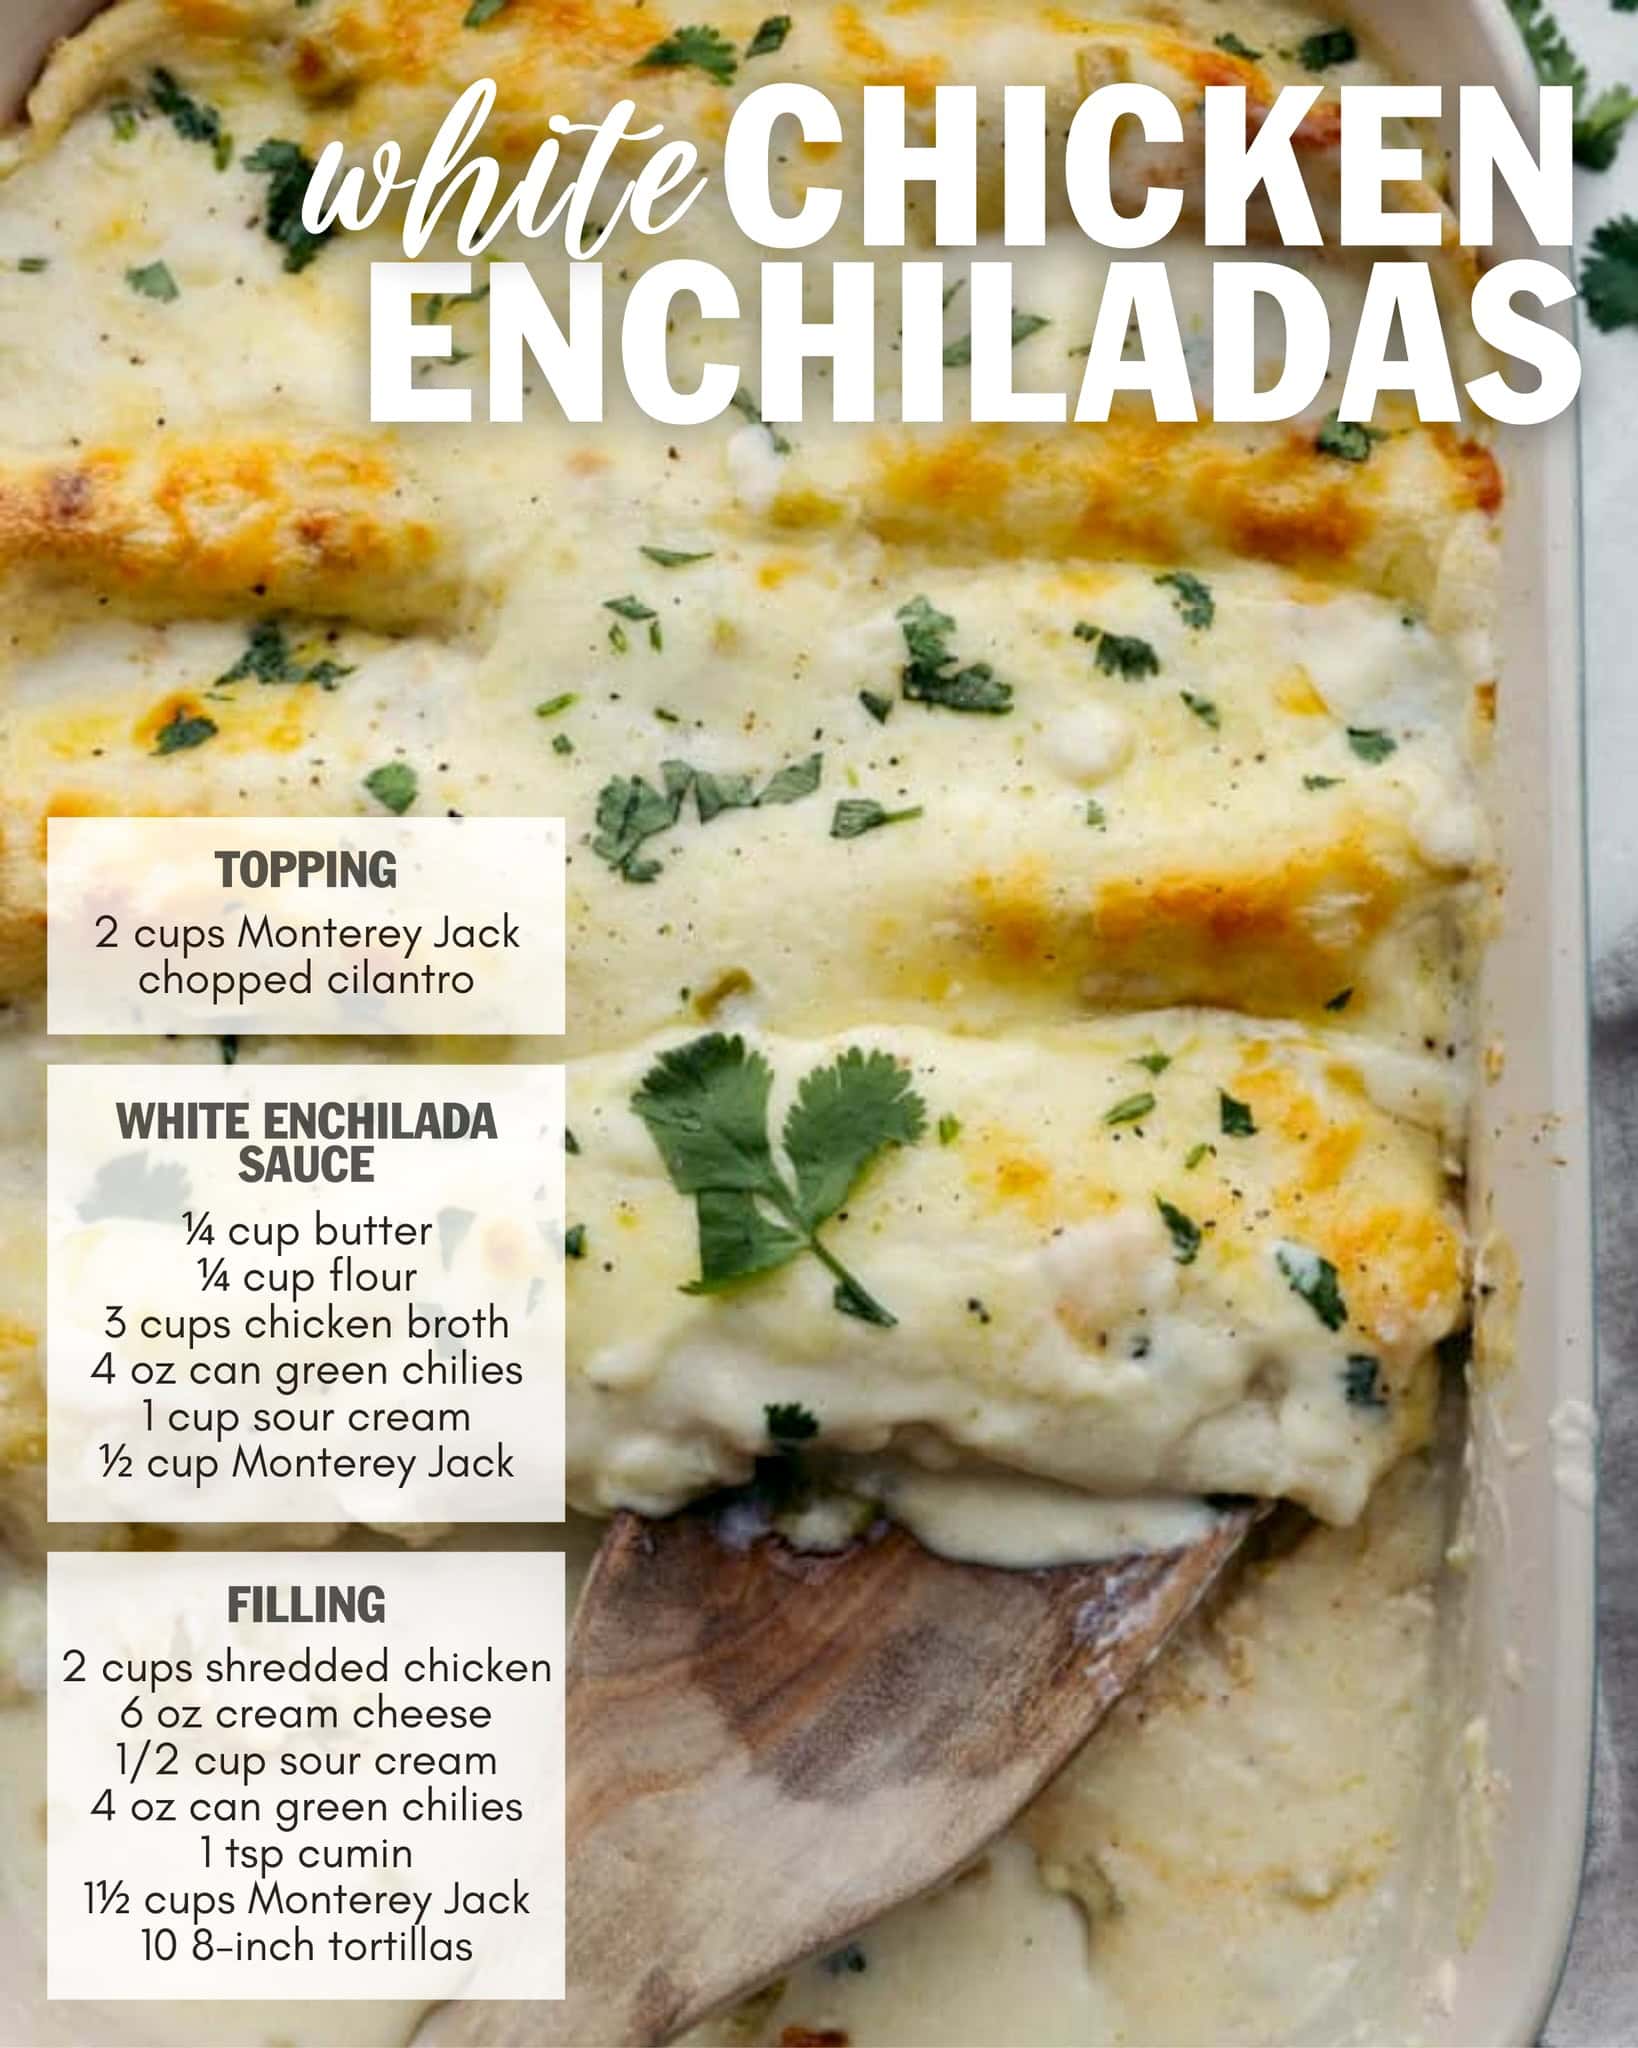 A dish of white chicken enchiladas topped with melted Monterey Jack cheese and chopped cilantro, perfect for busy families. The recipe list for toppings, sauce, and filling is on the right